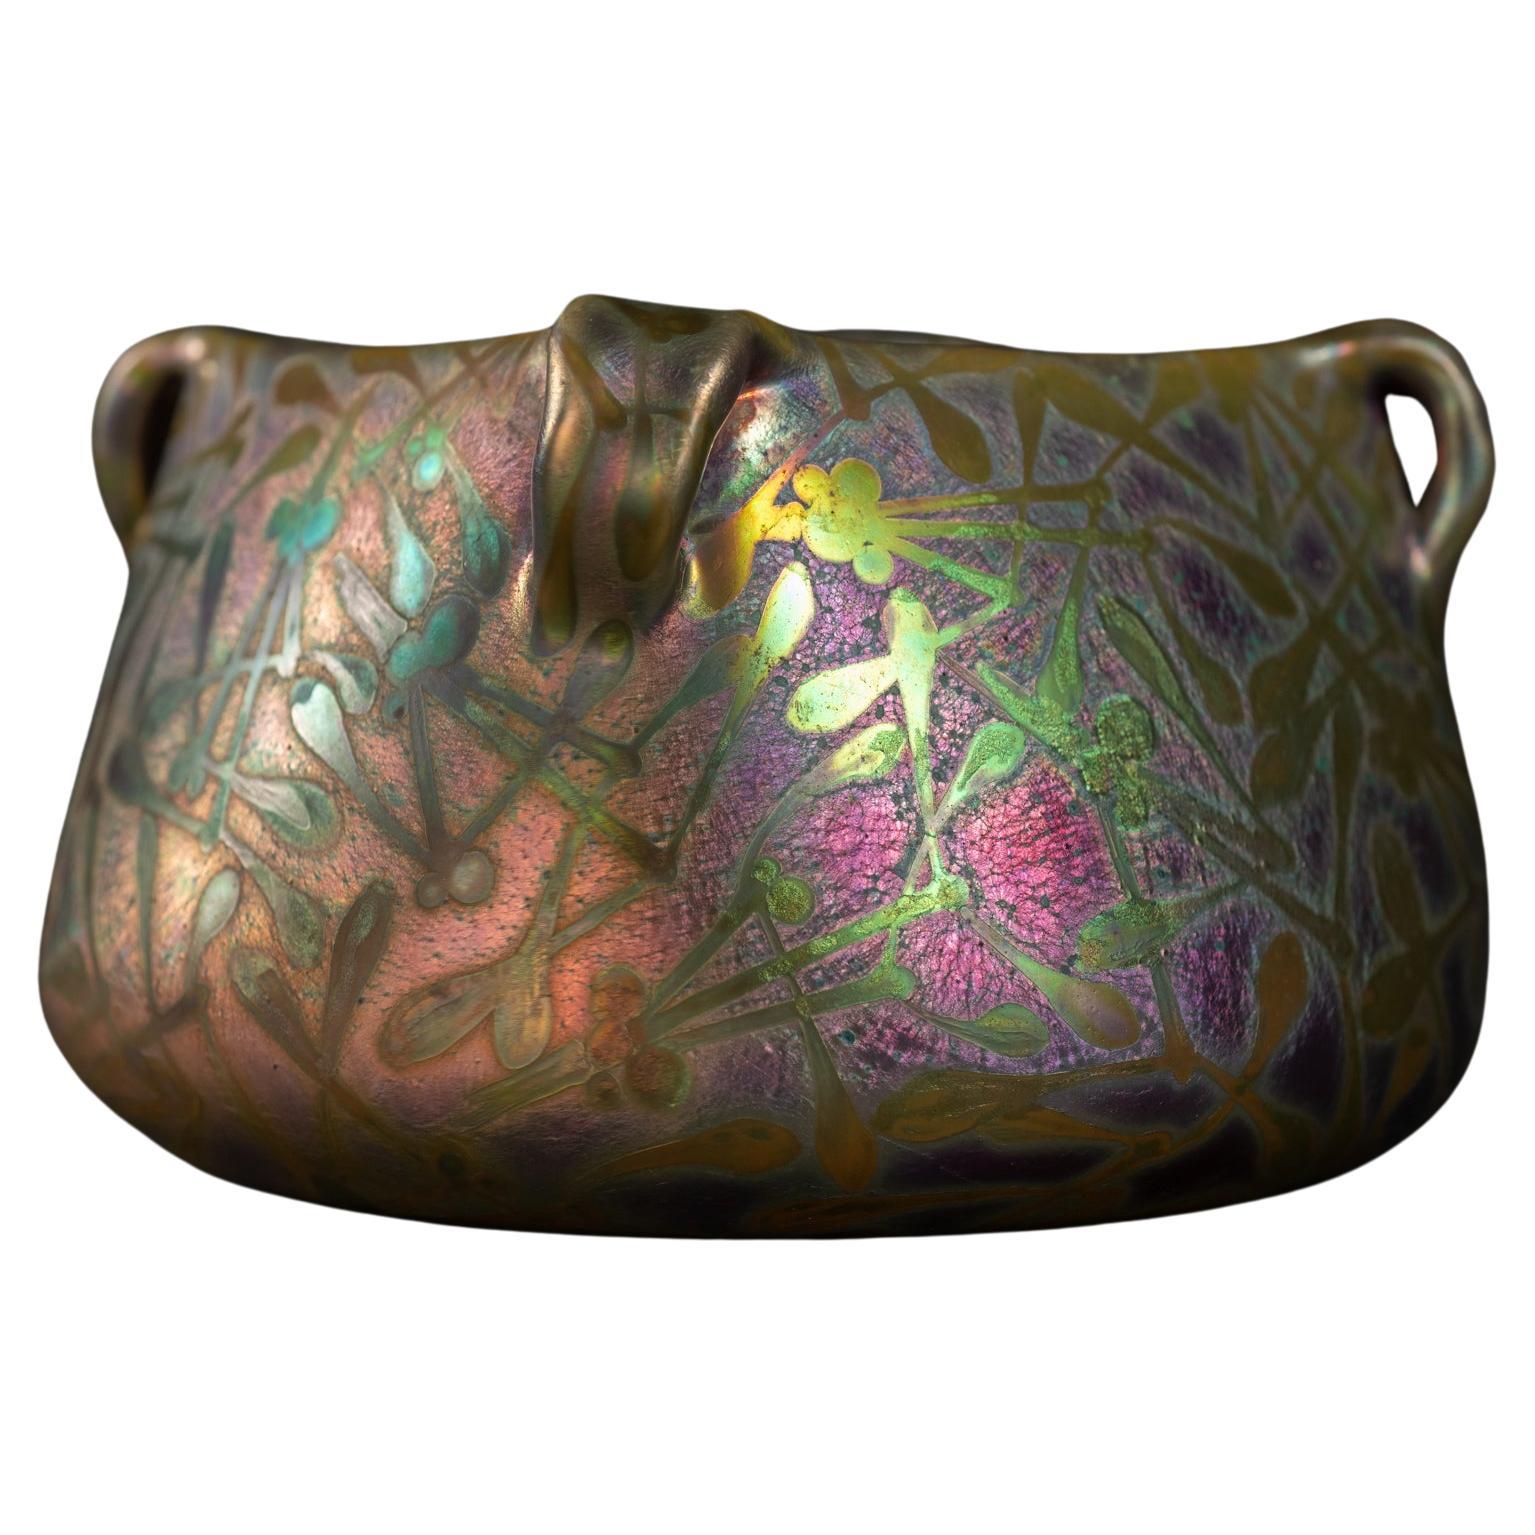 Spectral Seed Iridescent Art Nouveau Bowl by Clement Massier For Sale